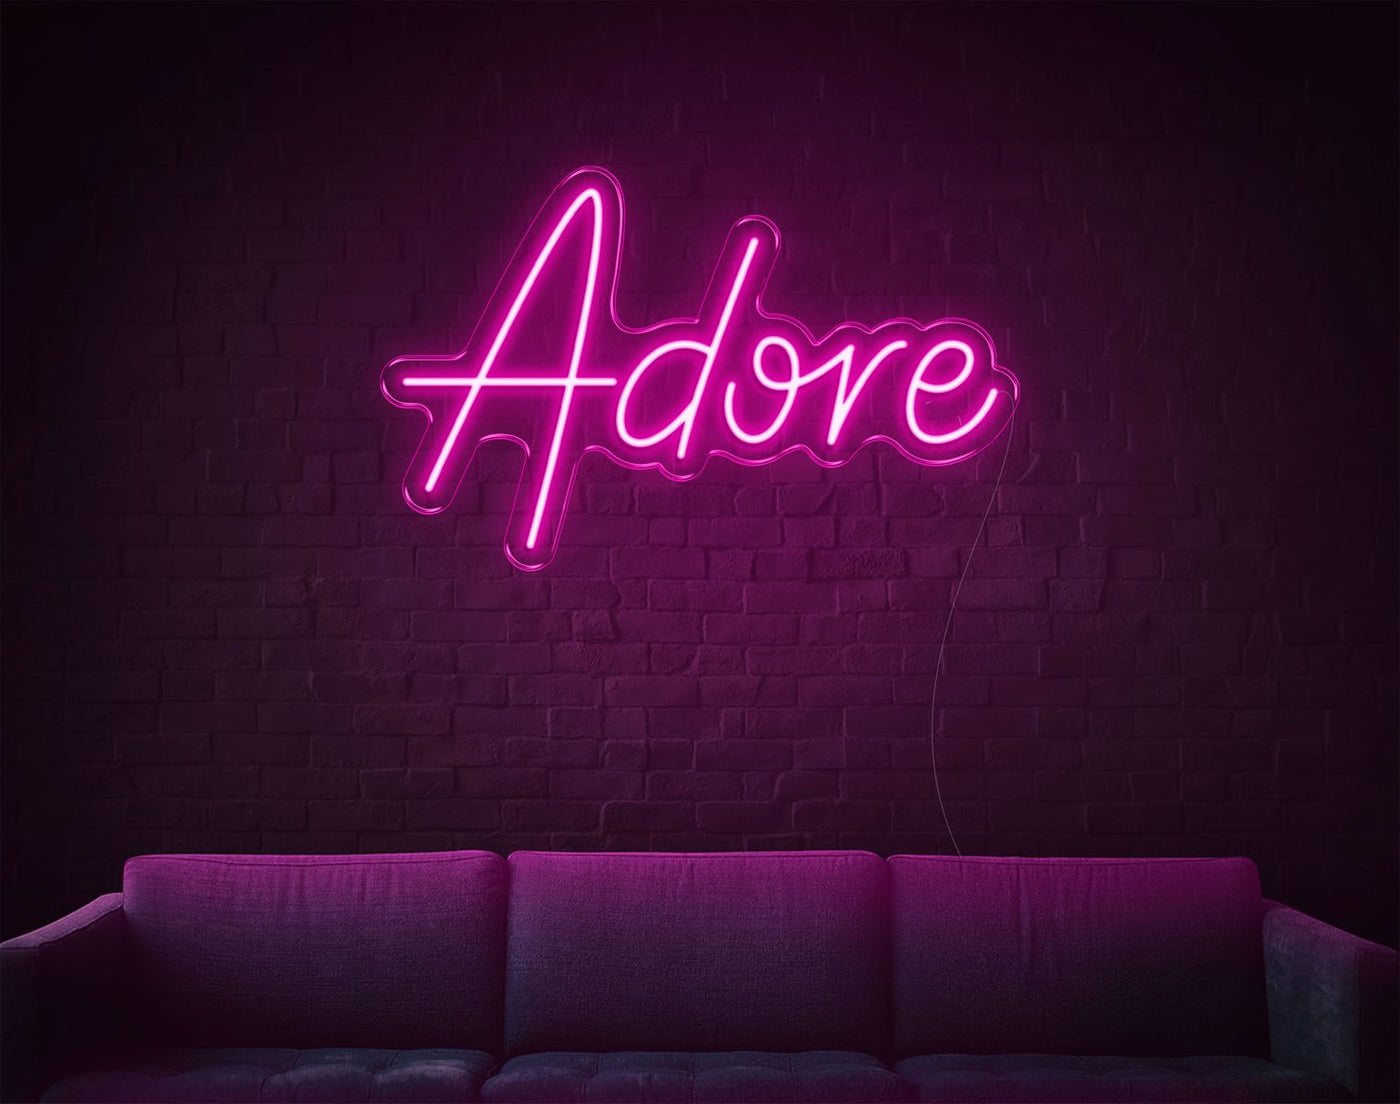 Adore LED Neon Sign - 15inch x 24inchHot Pink -LED Neon Signs-Item-217-1